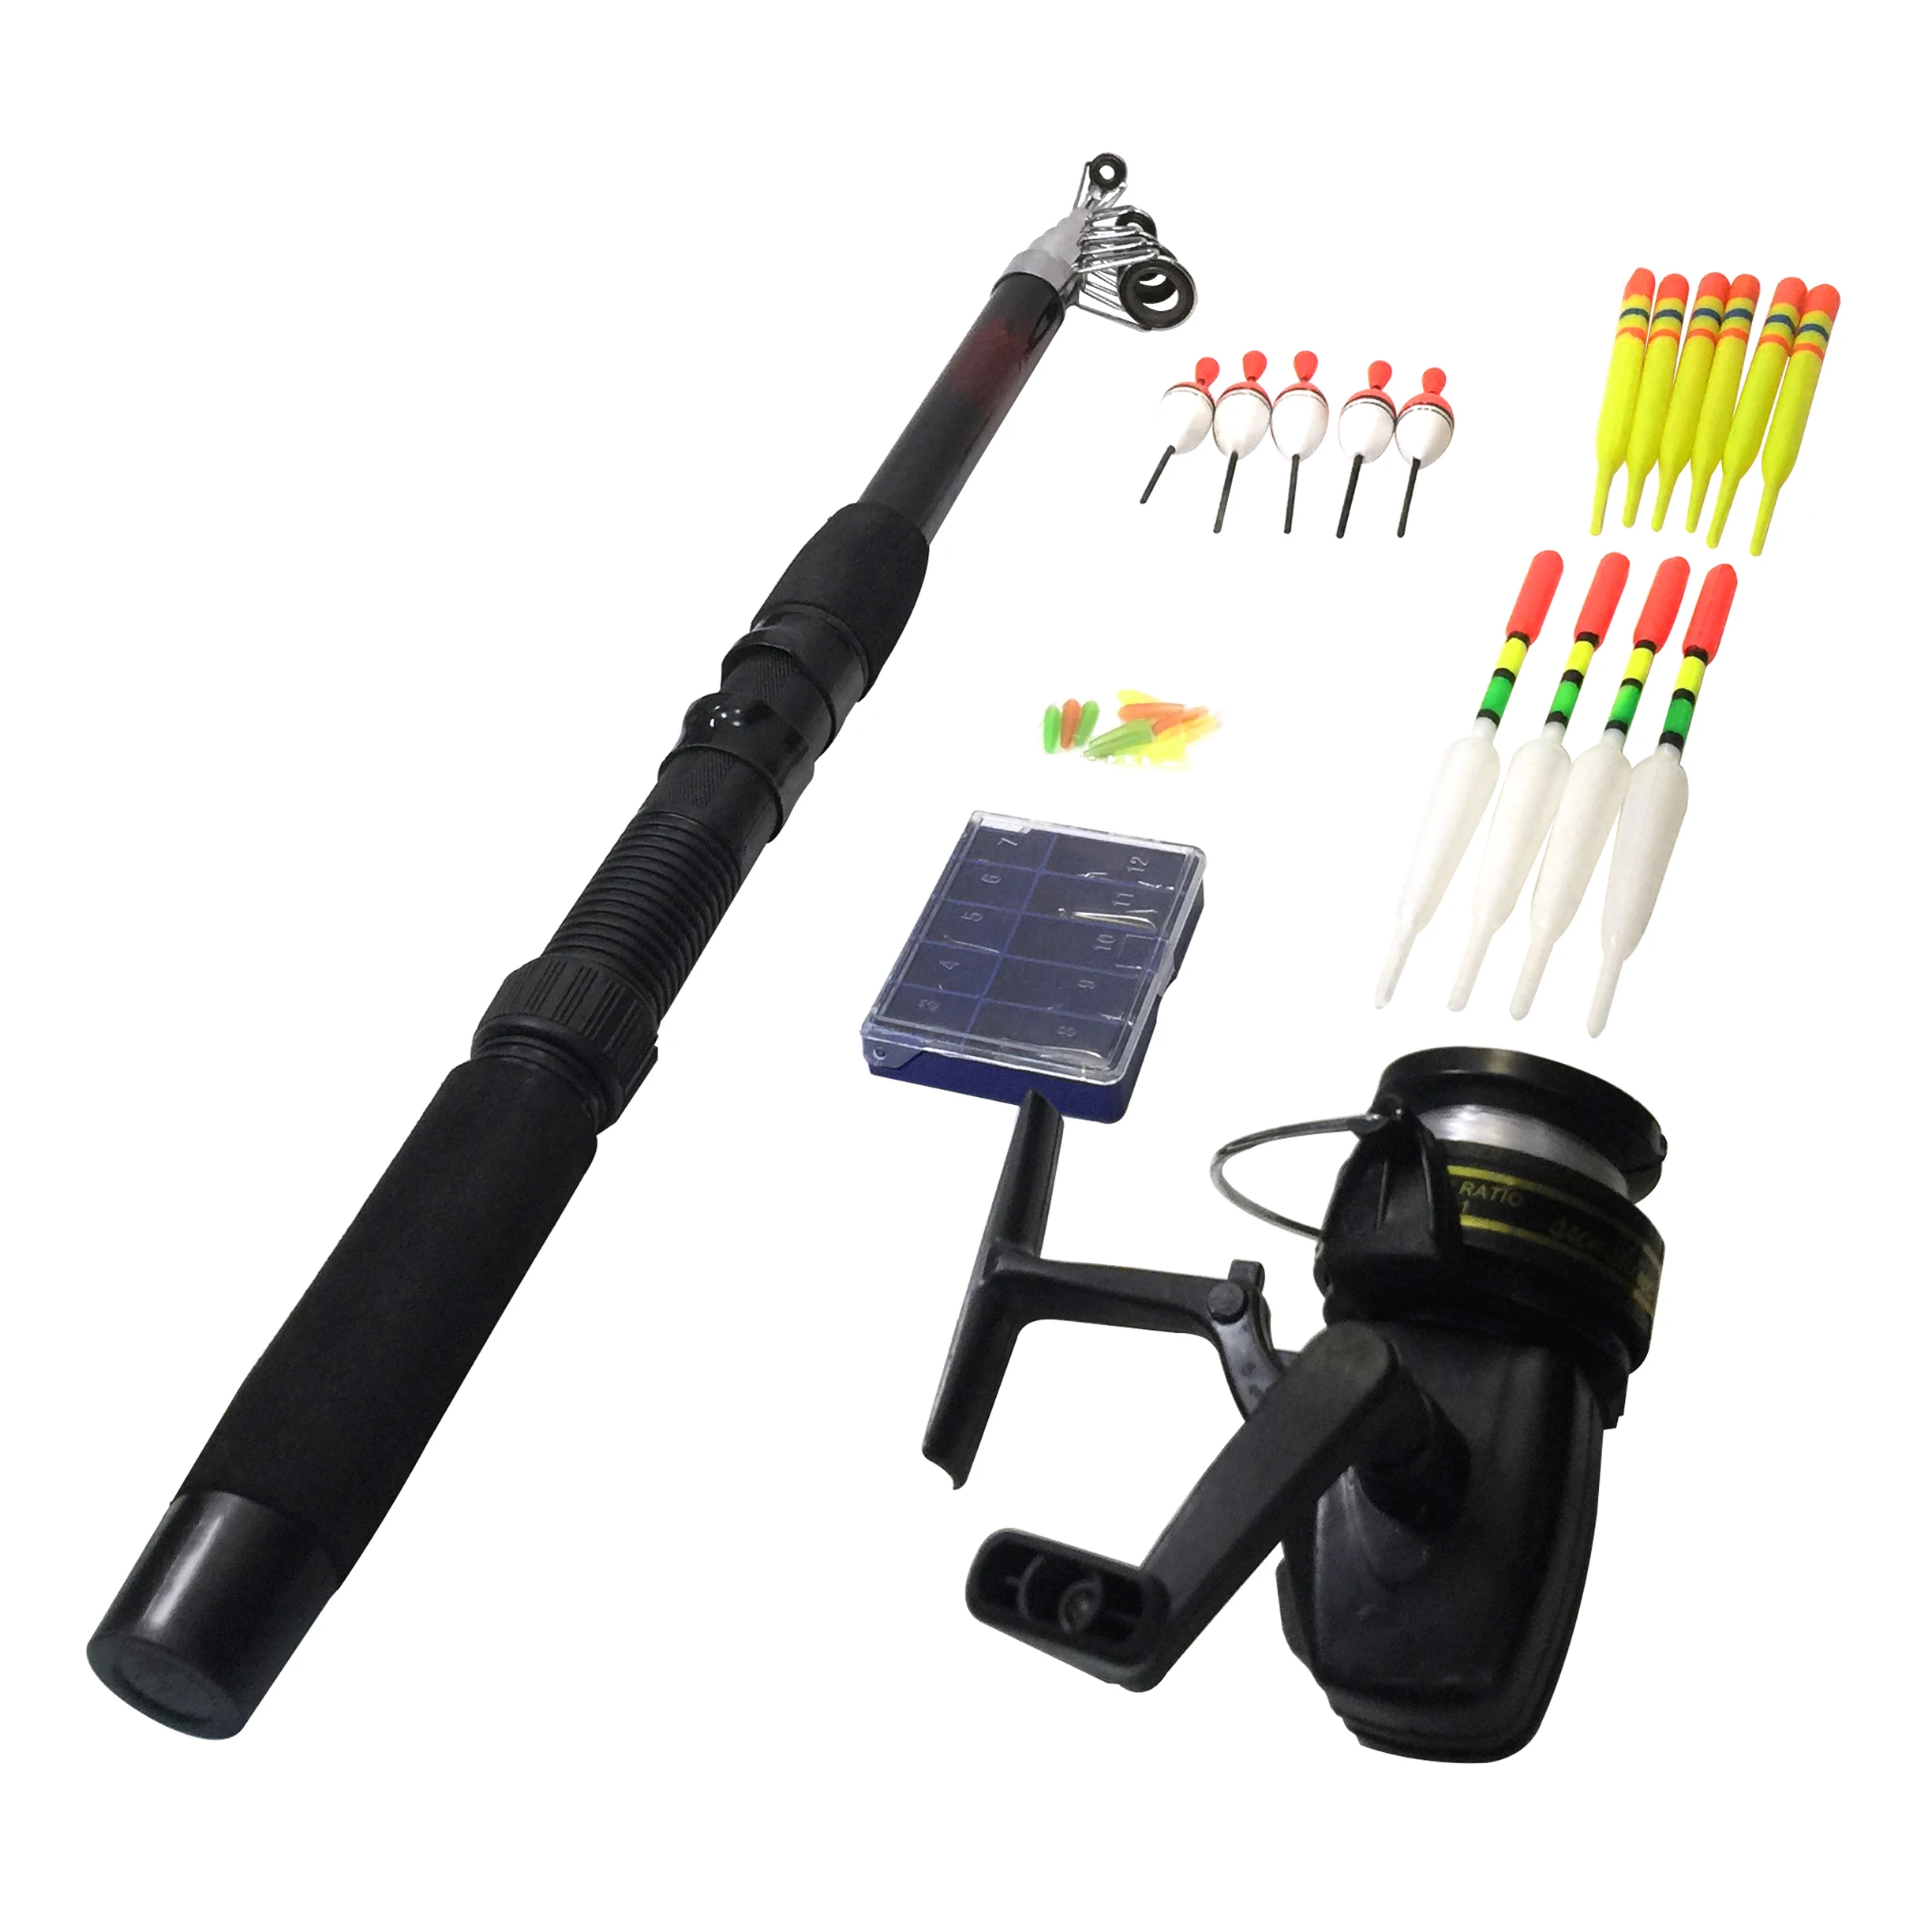 

Cheap new Spinning Telescopic Fishing Rod and reel Combo Kit Set with Fishing floats and hooks fishing combo blister package, Black/white/red/yellow/orange, customizable